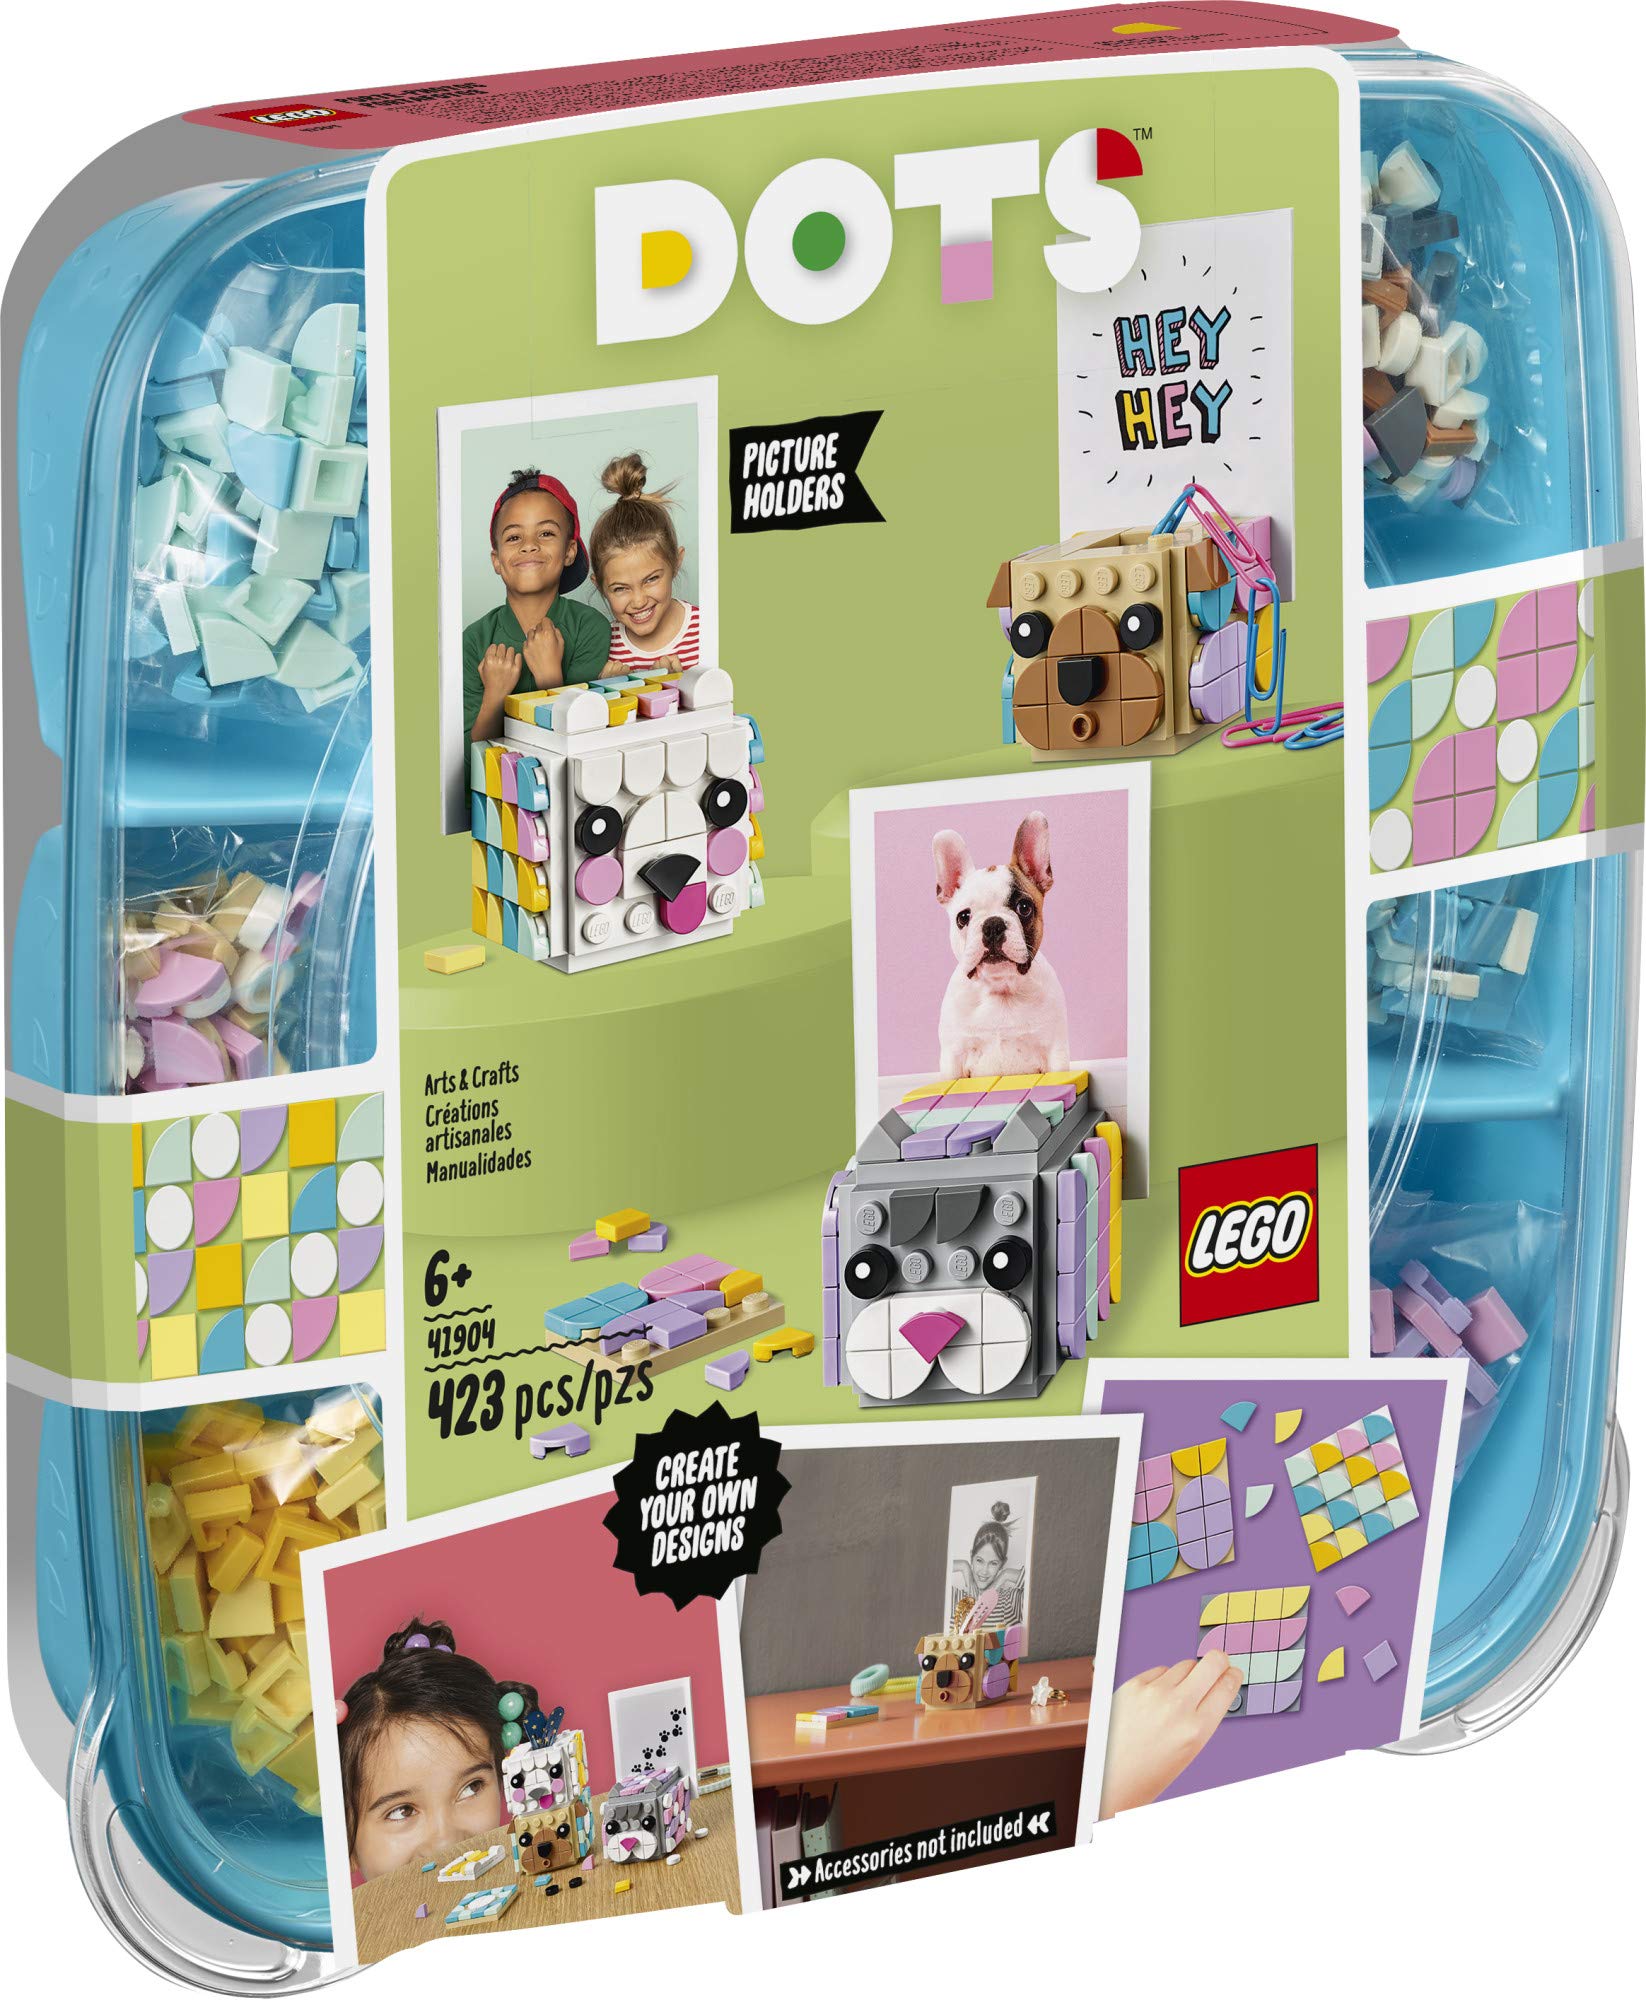 LEGO DOTS Animal Picture Holders 41904 DIY Craft; A Fun Project for Kids who Like Making Creative Room Decor, That Also Makes a Cool Holiday or Birthday Gift (423 Pieces)